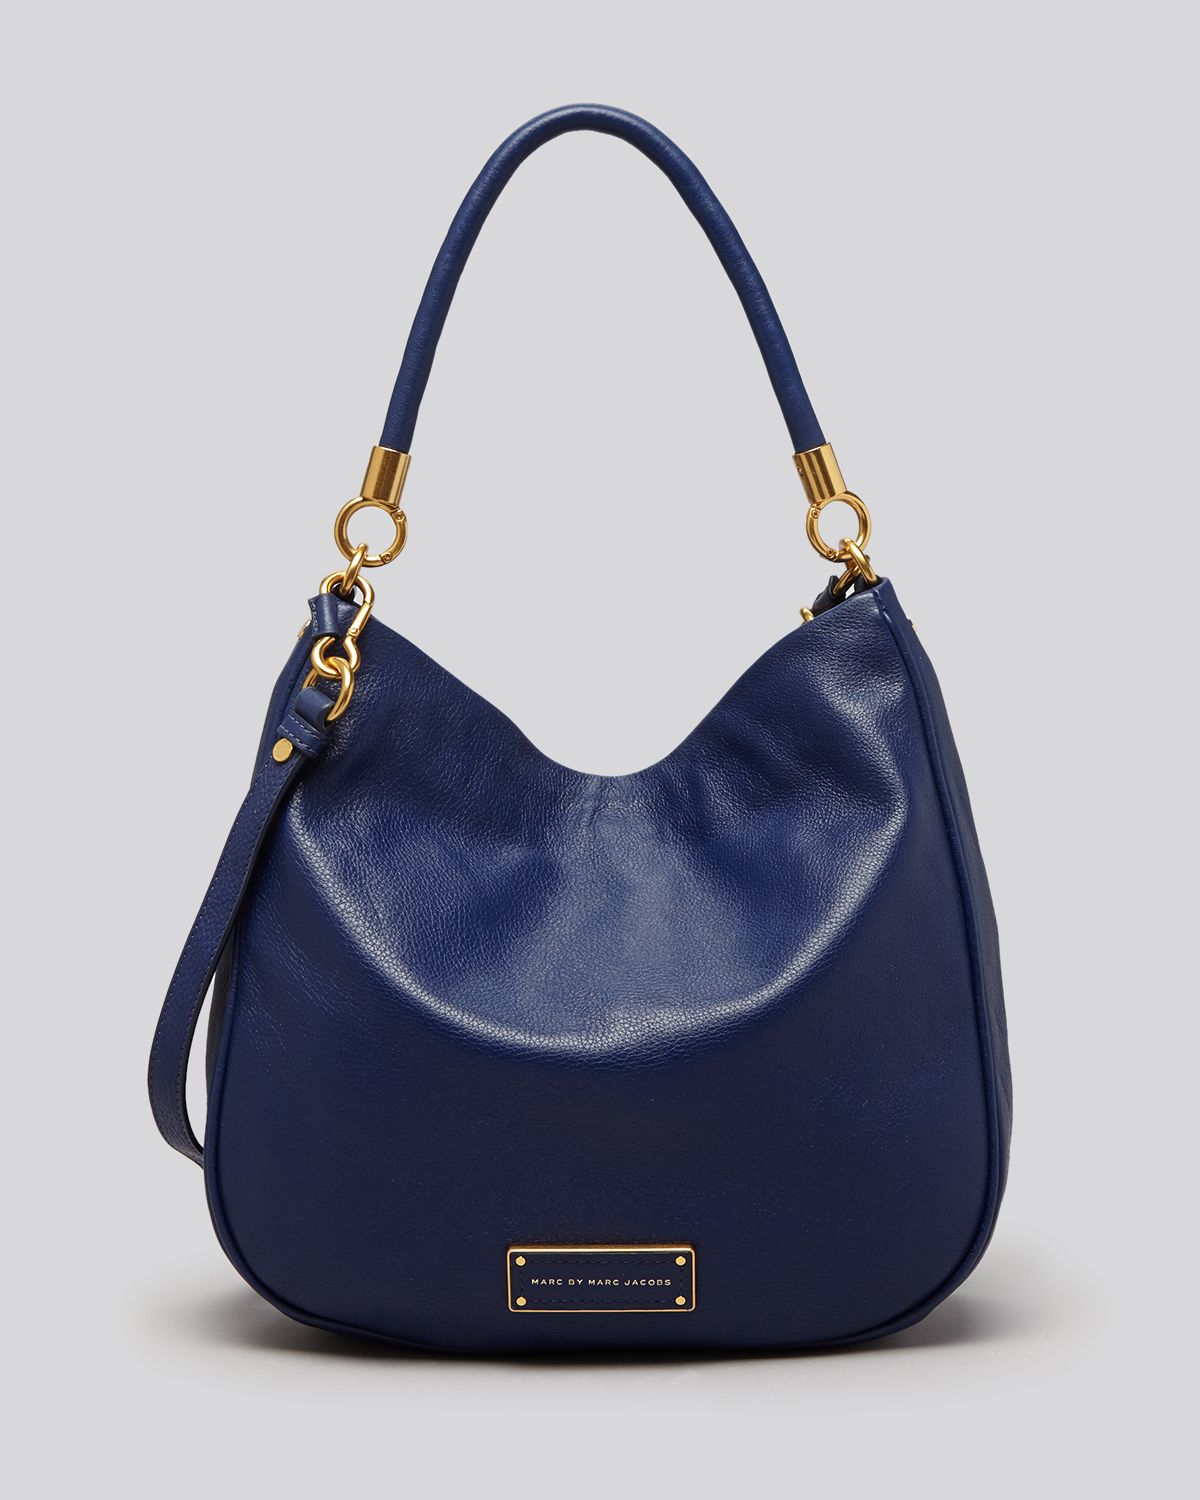 Lyst - Marc by marc jacobs Classic Q Hillier Hobo Bag in 